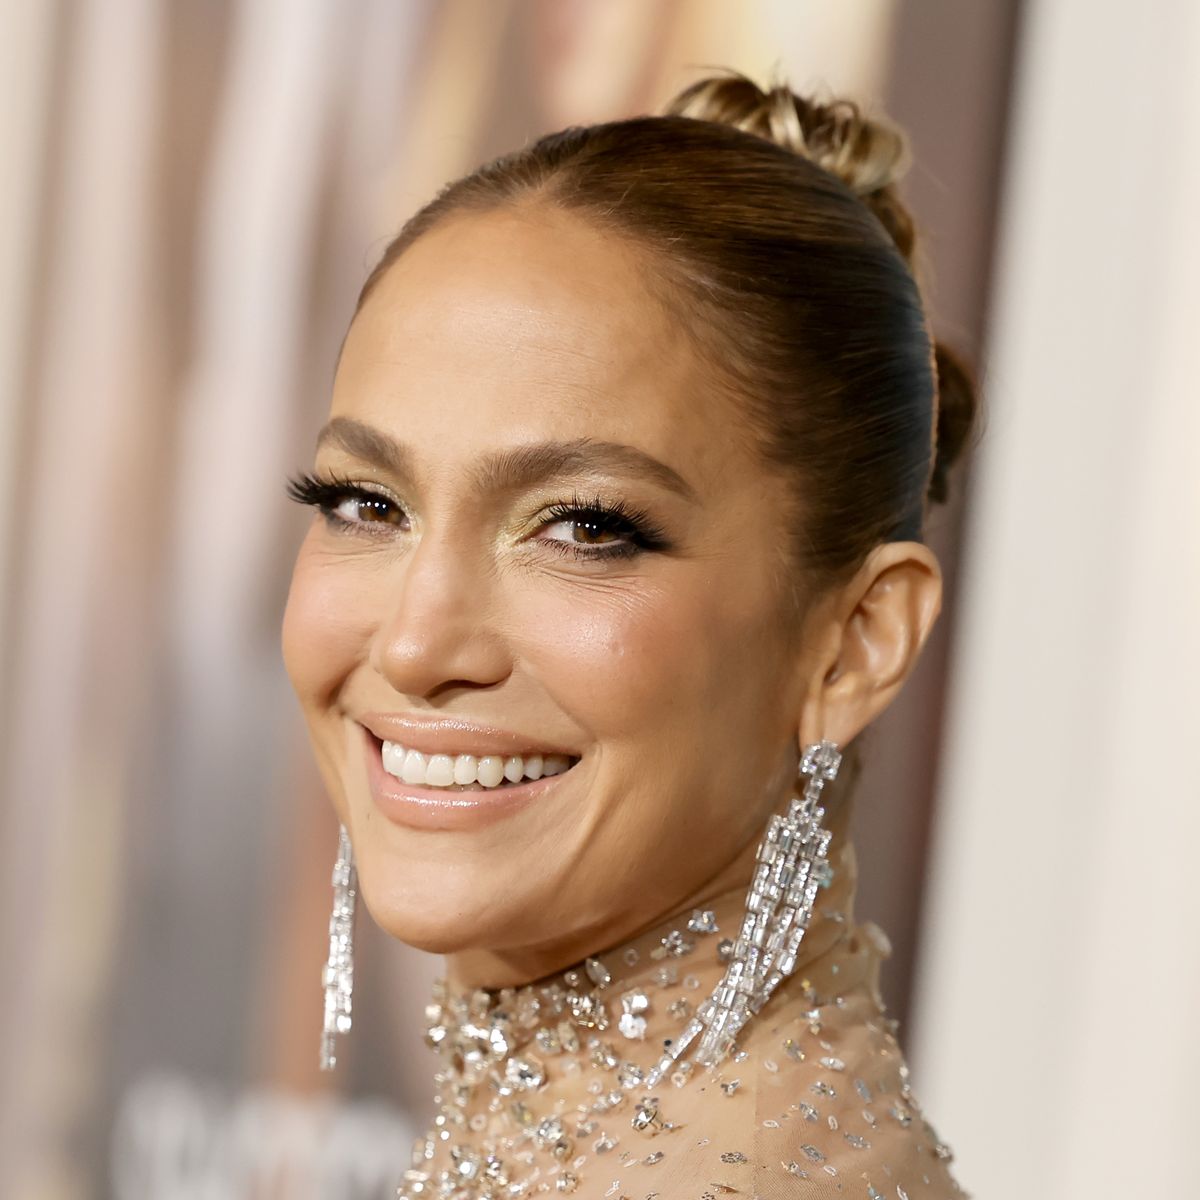 Prevention Magazine: Jennifer Lopez Is Glowing in This No-Makeup